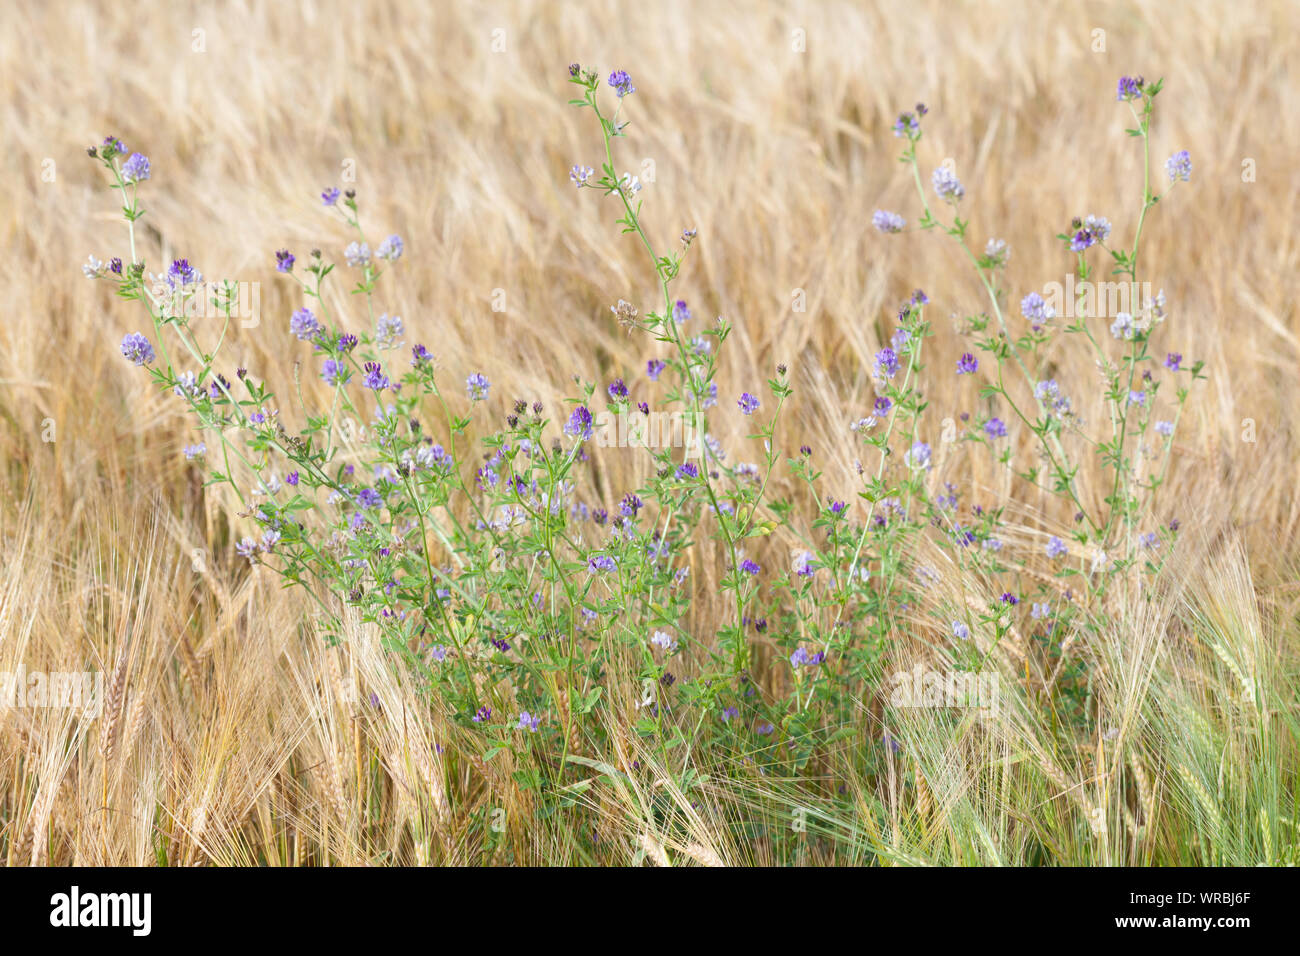 Weed with blue flowers in a rye field Stock Photo